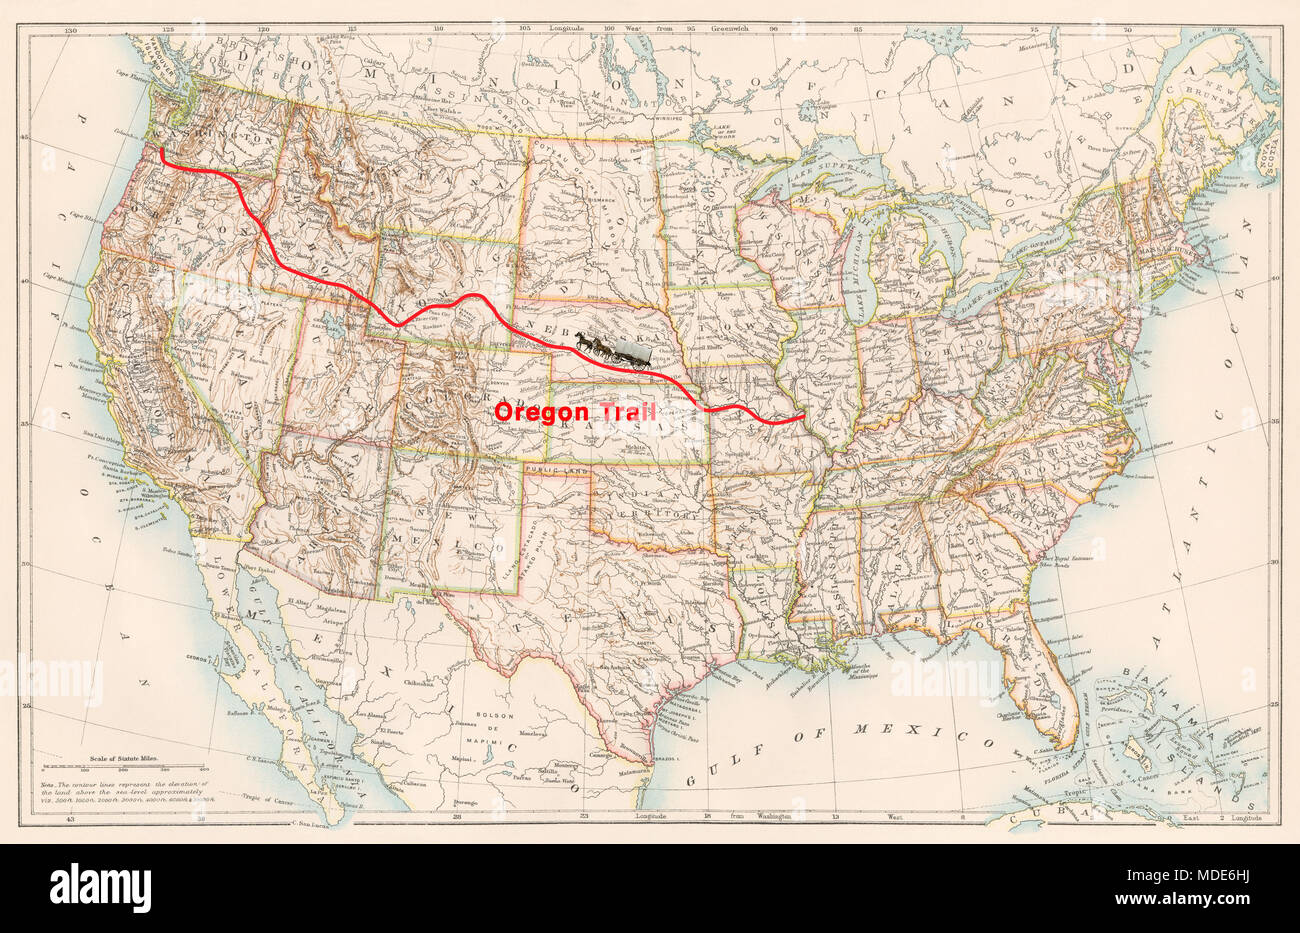 Oregon Trail route on an 1870s map of the US. Digital illustration Stock Photo